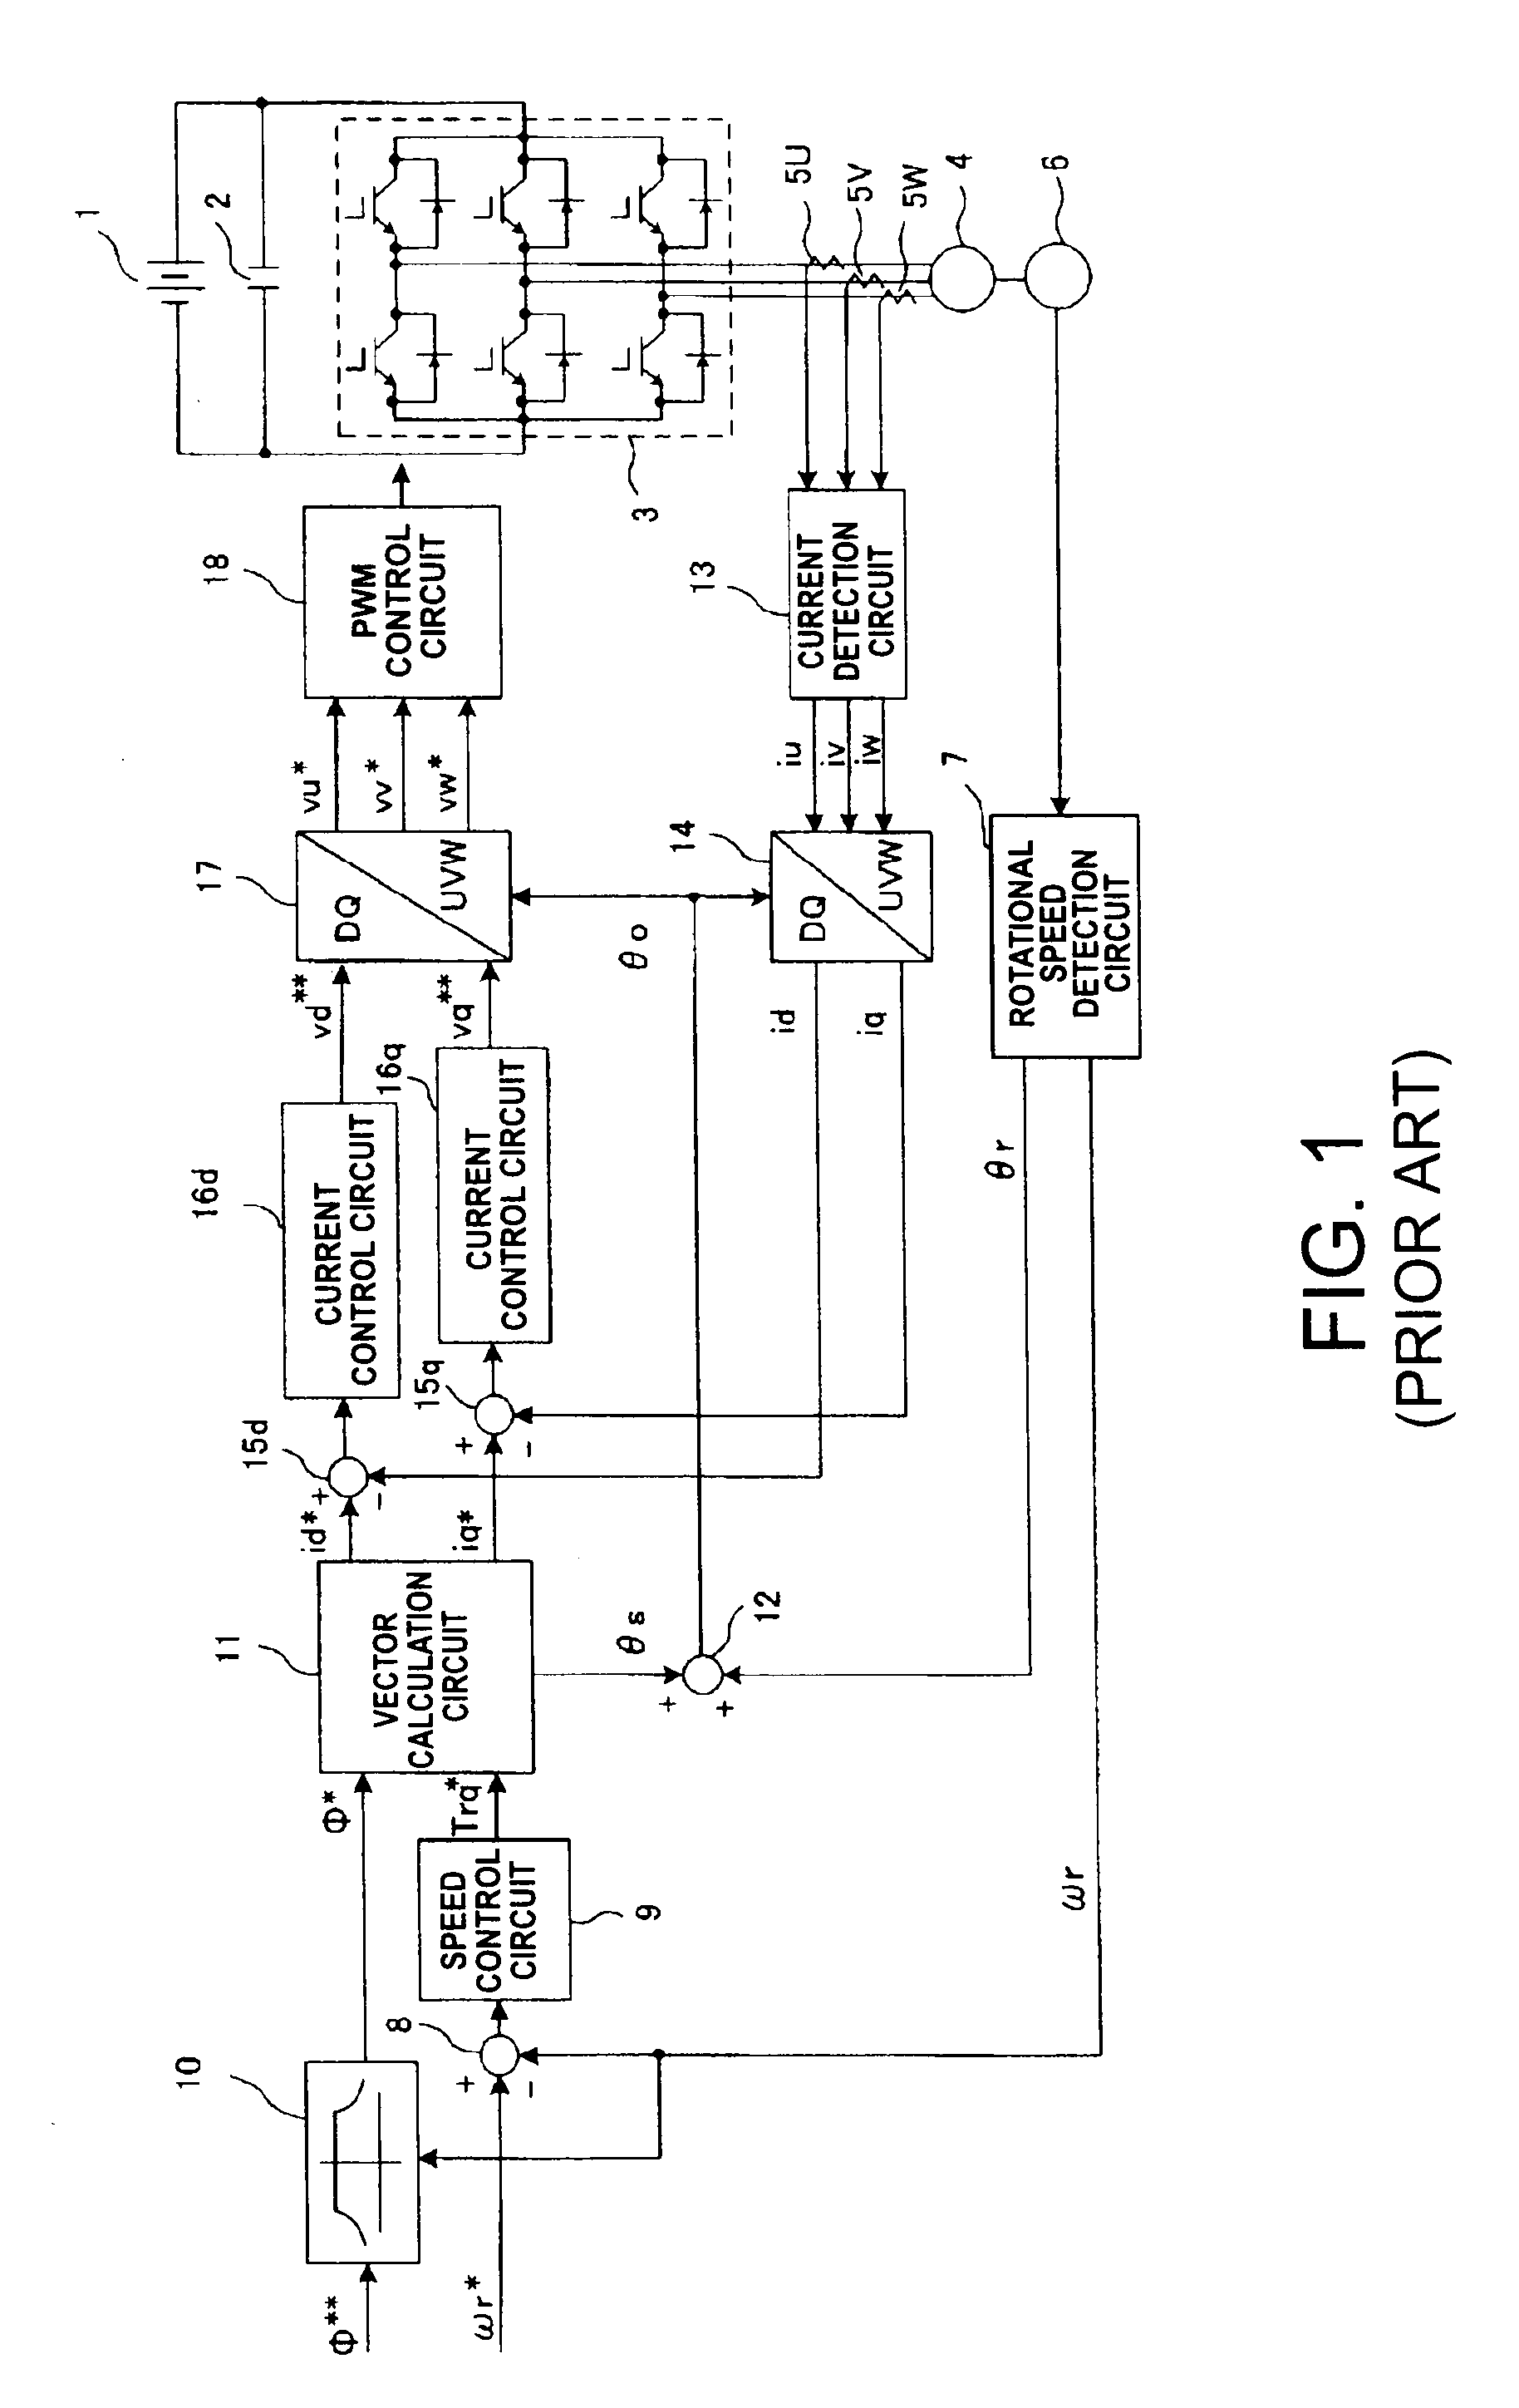 Inverter control device and ac motor control device using this inverter control device